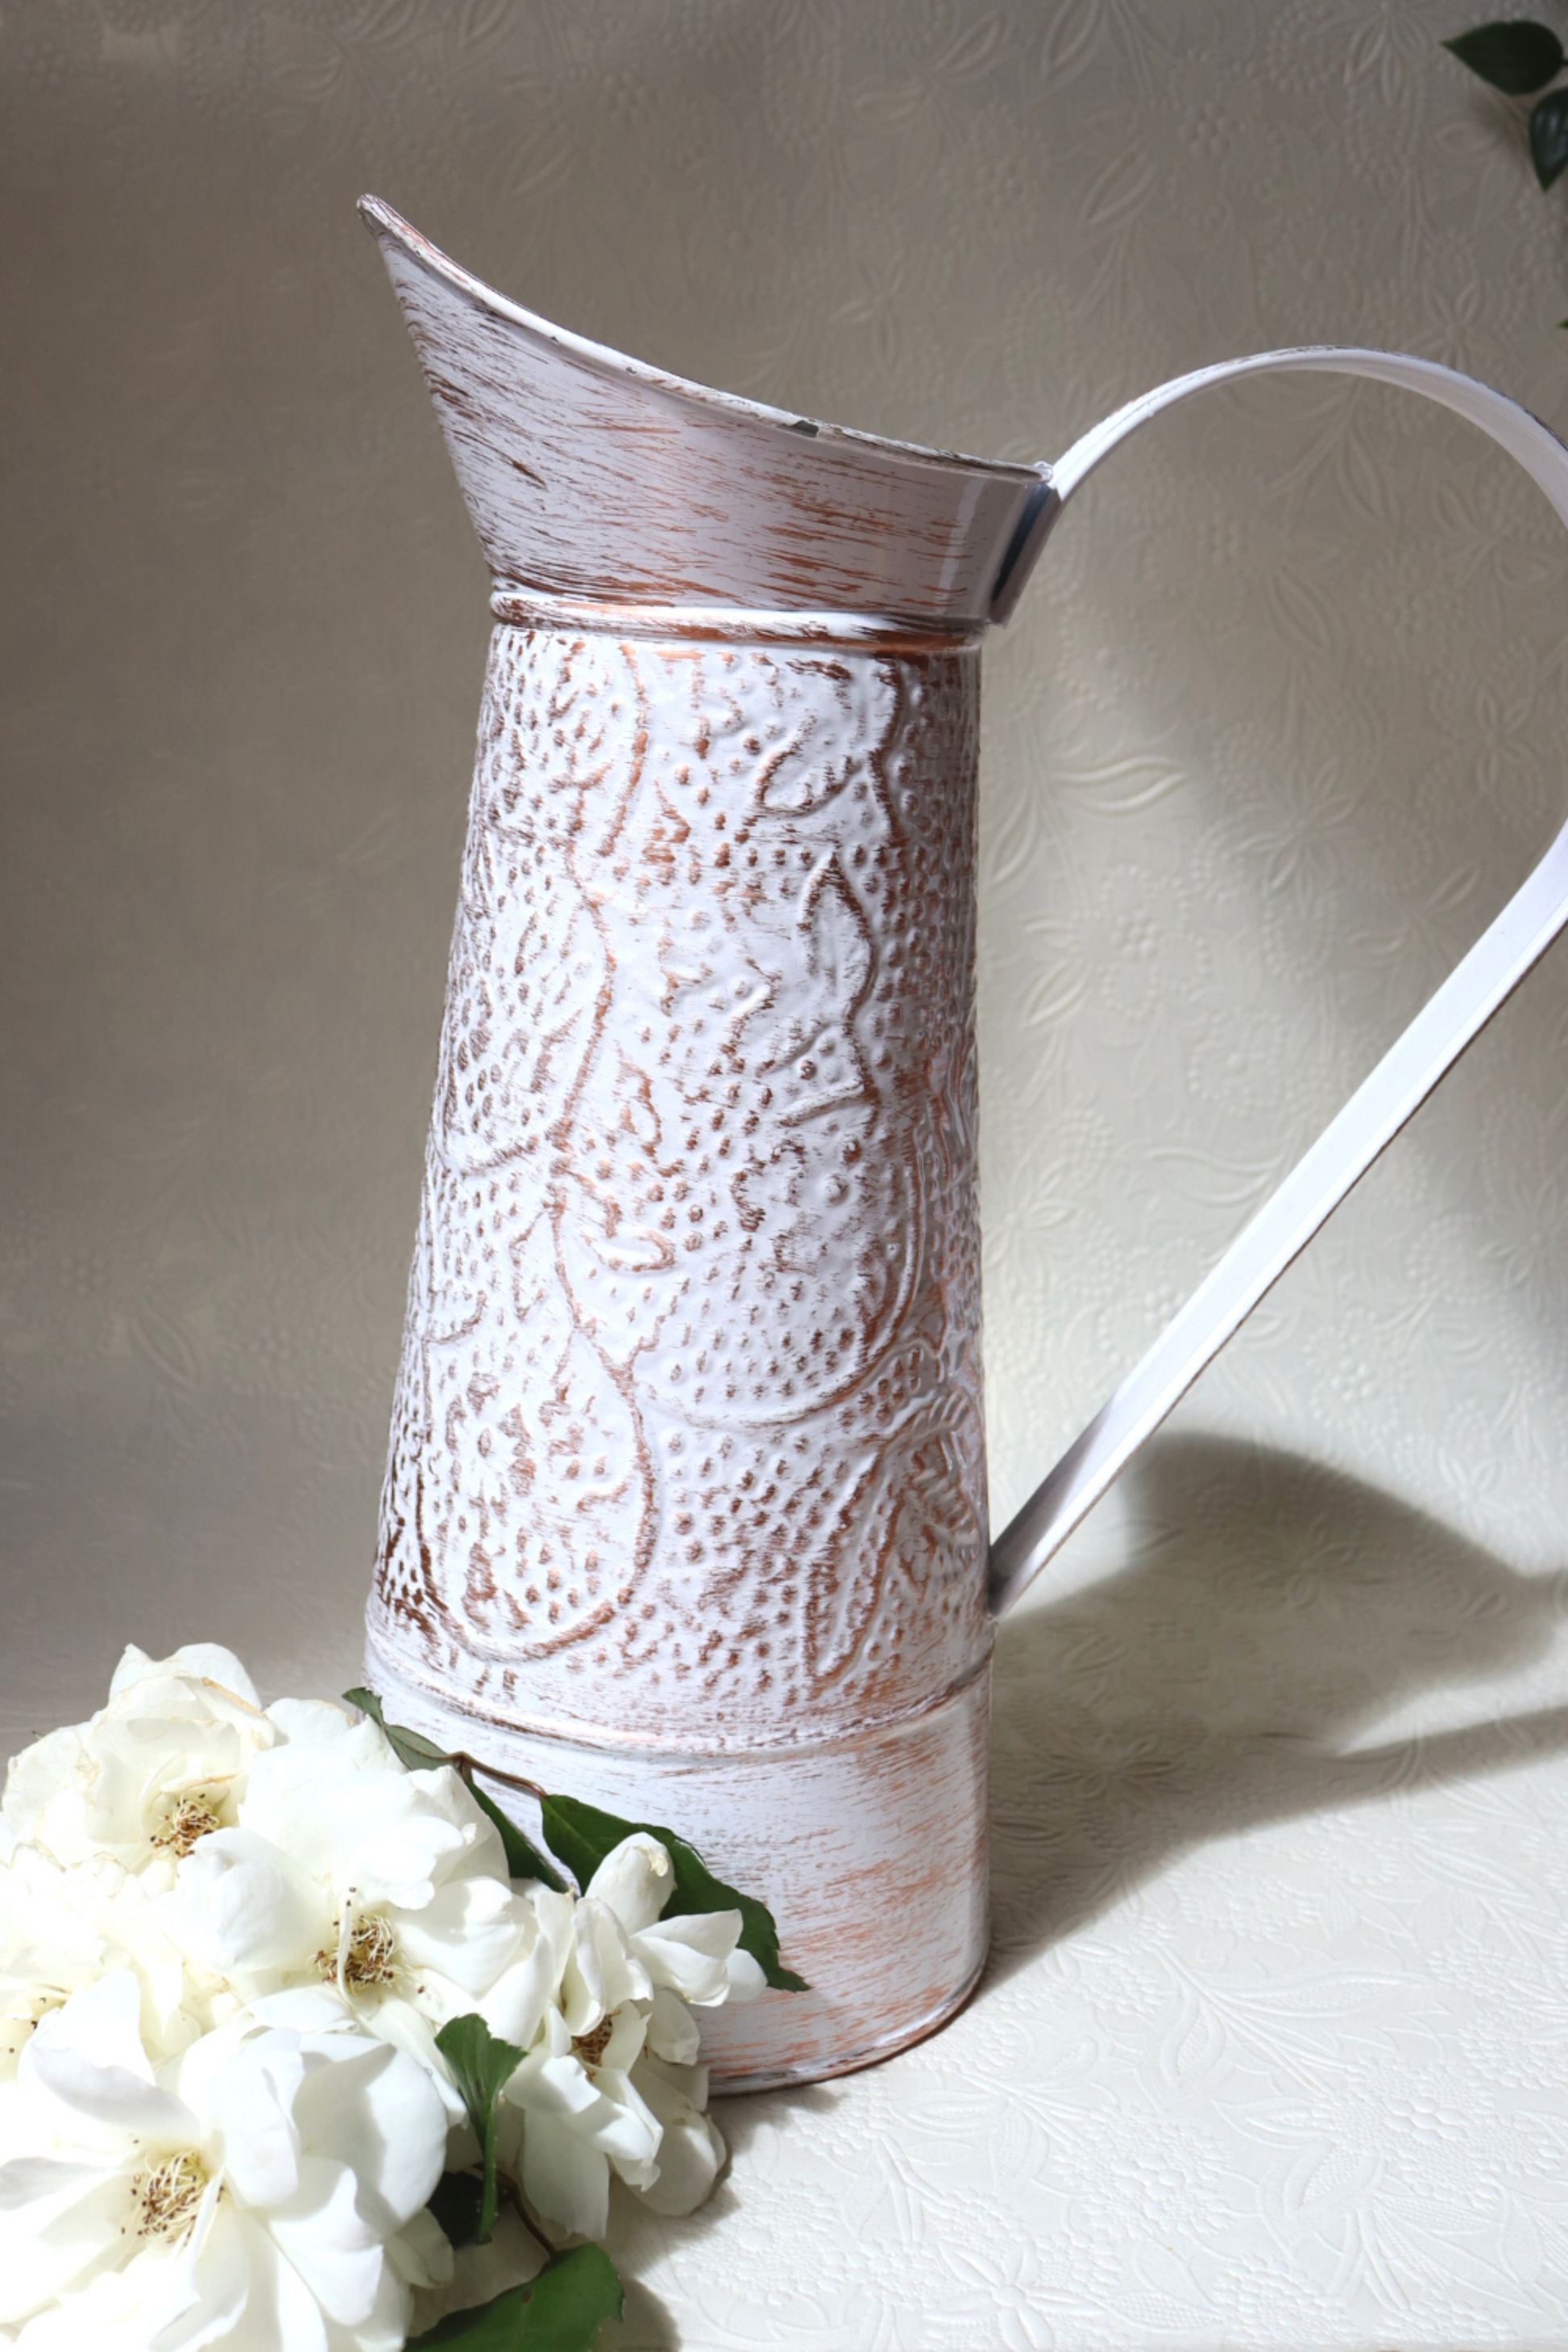 White Watering Metal Can/Jug - Copper finish, 32.5 cm, 3 Litres, Plant Lover Gift - Aksa Home Decor 